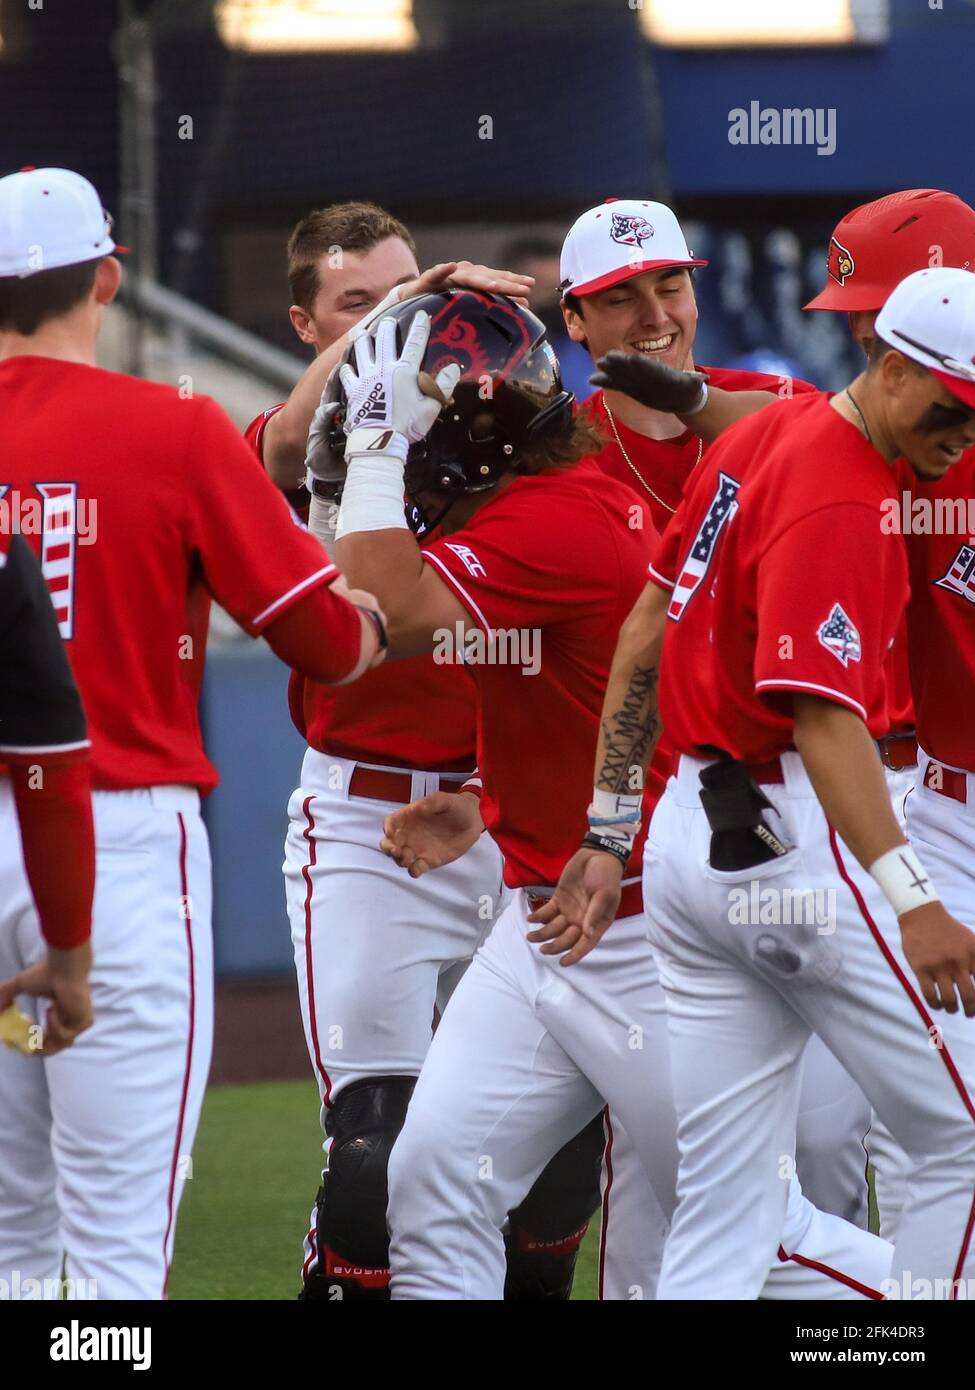 Lexington, KY, USA. 20th Apr, 2021. Louisville's Dalton Rushing celebrates his home run by dunning a football helmet during a game between the Kentucky Wildcats and the Louisville Cardinals at Kentucky Pride Park in Lexington, KY. Kevin Schultz/CSM/Alamy Live News Stock Photo